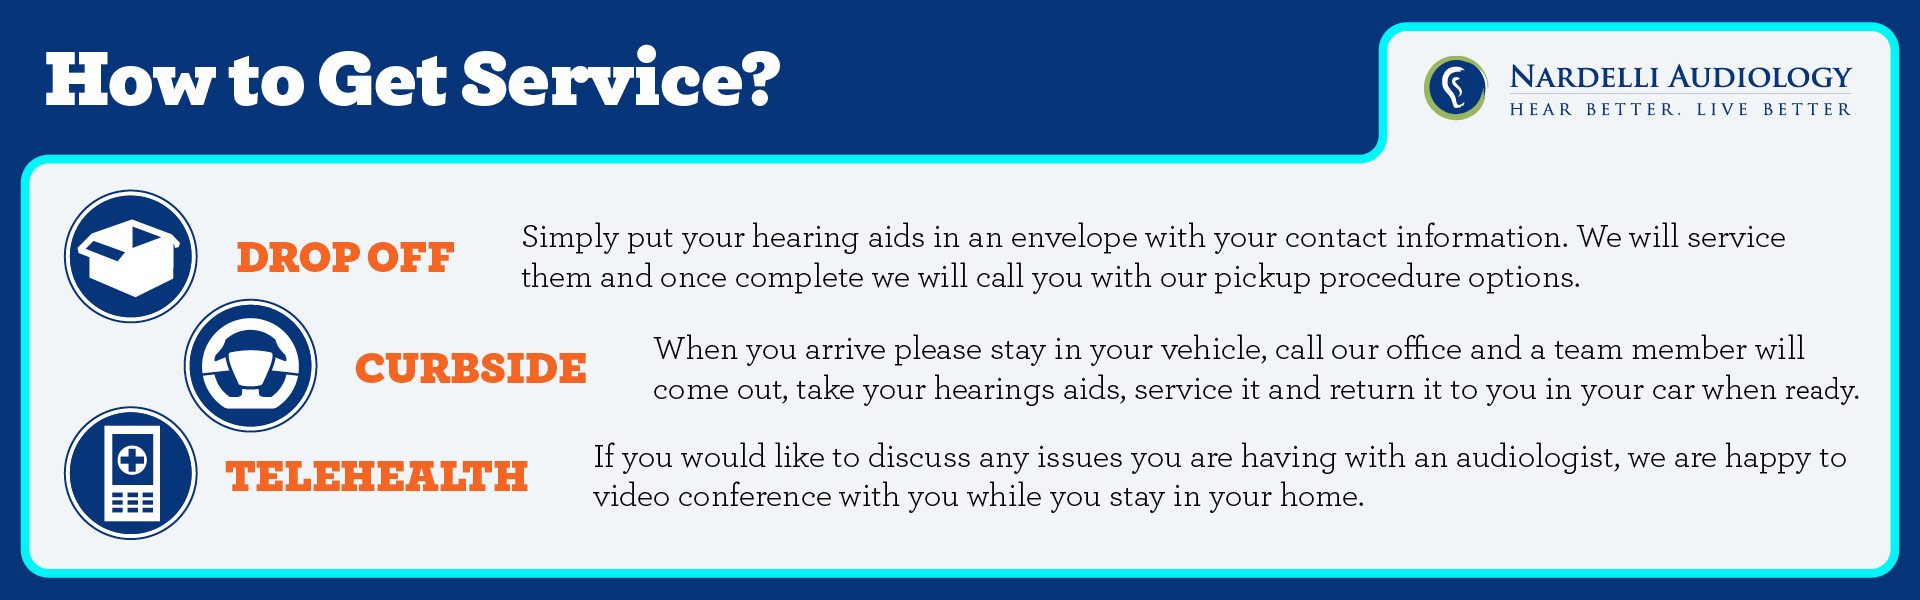 Hearing Services Banner | Nardelli Audiology